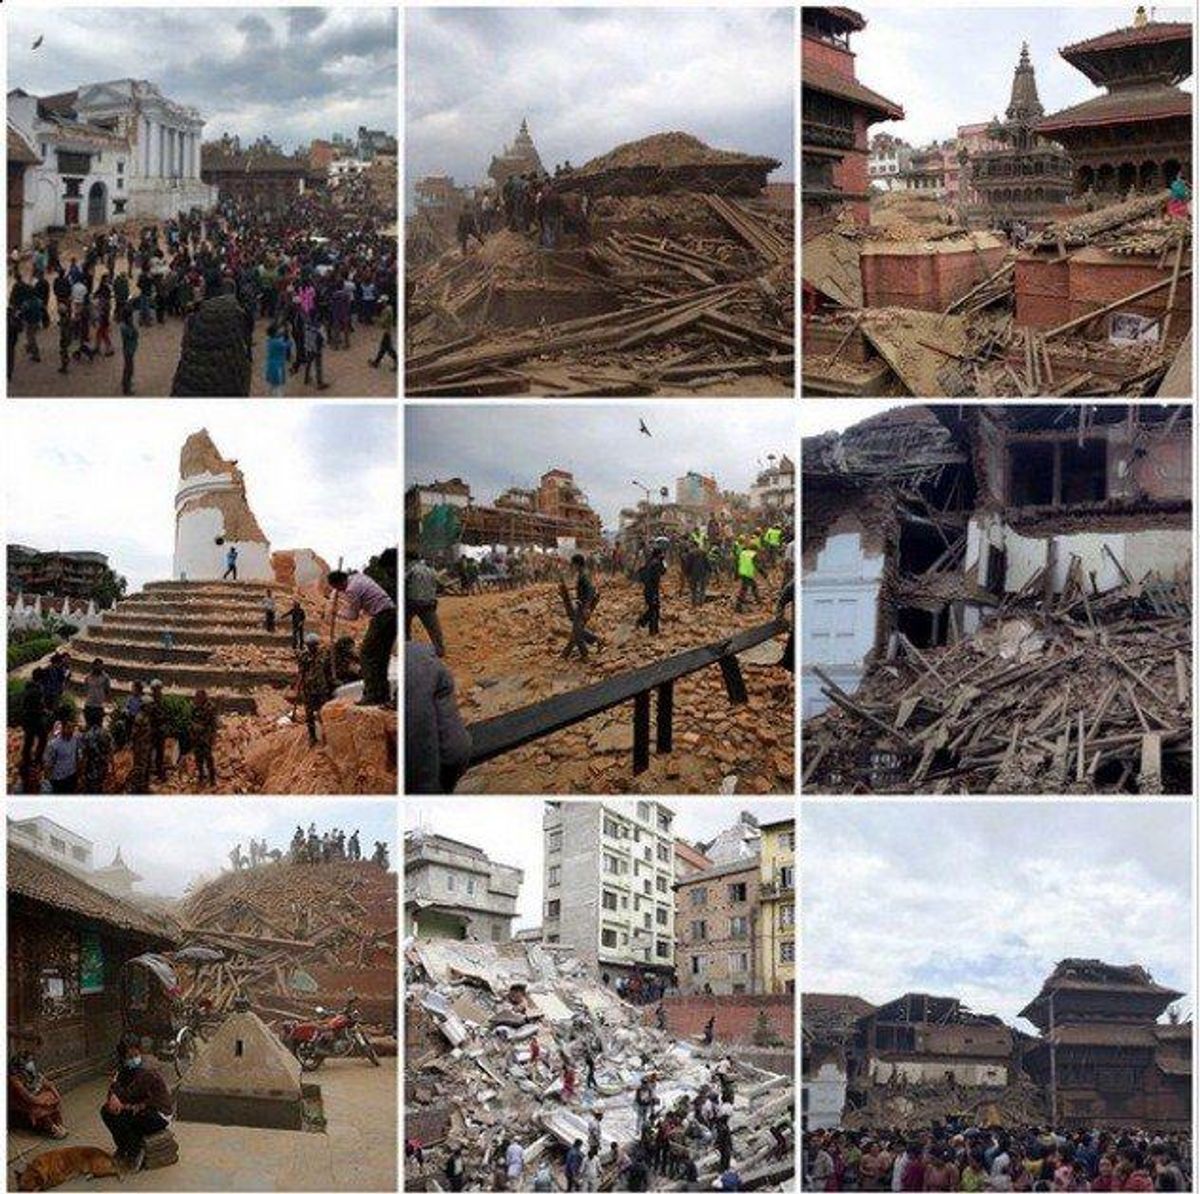 How to Help With Nepal Earthquake Relief